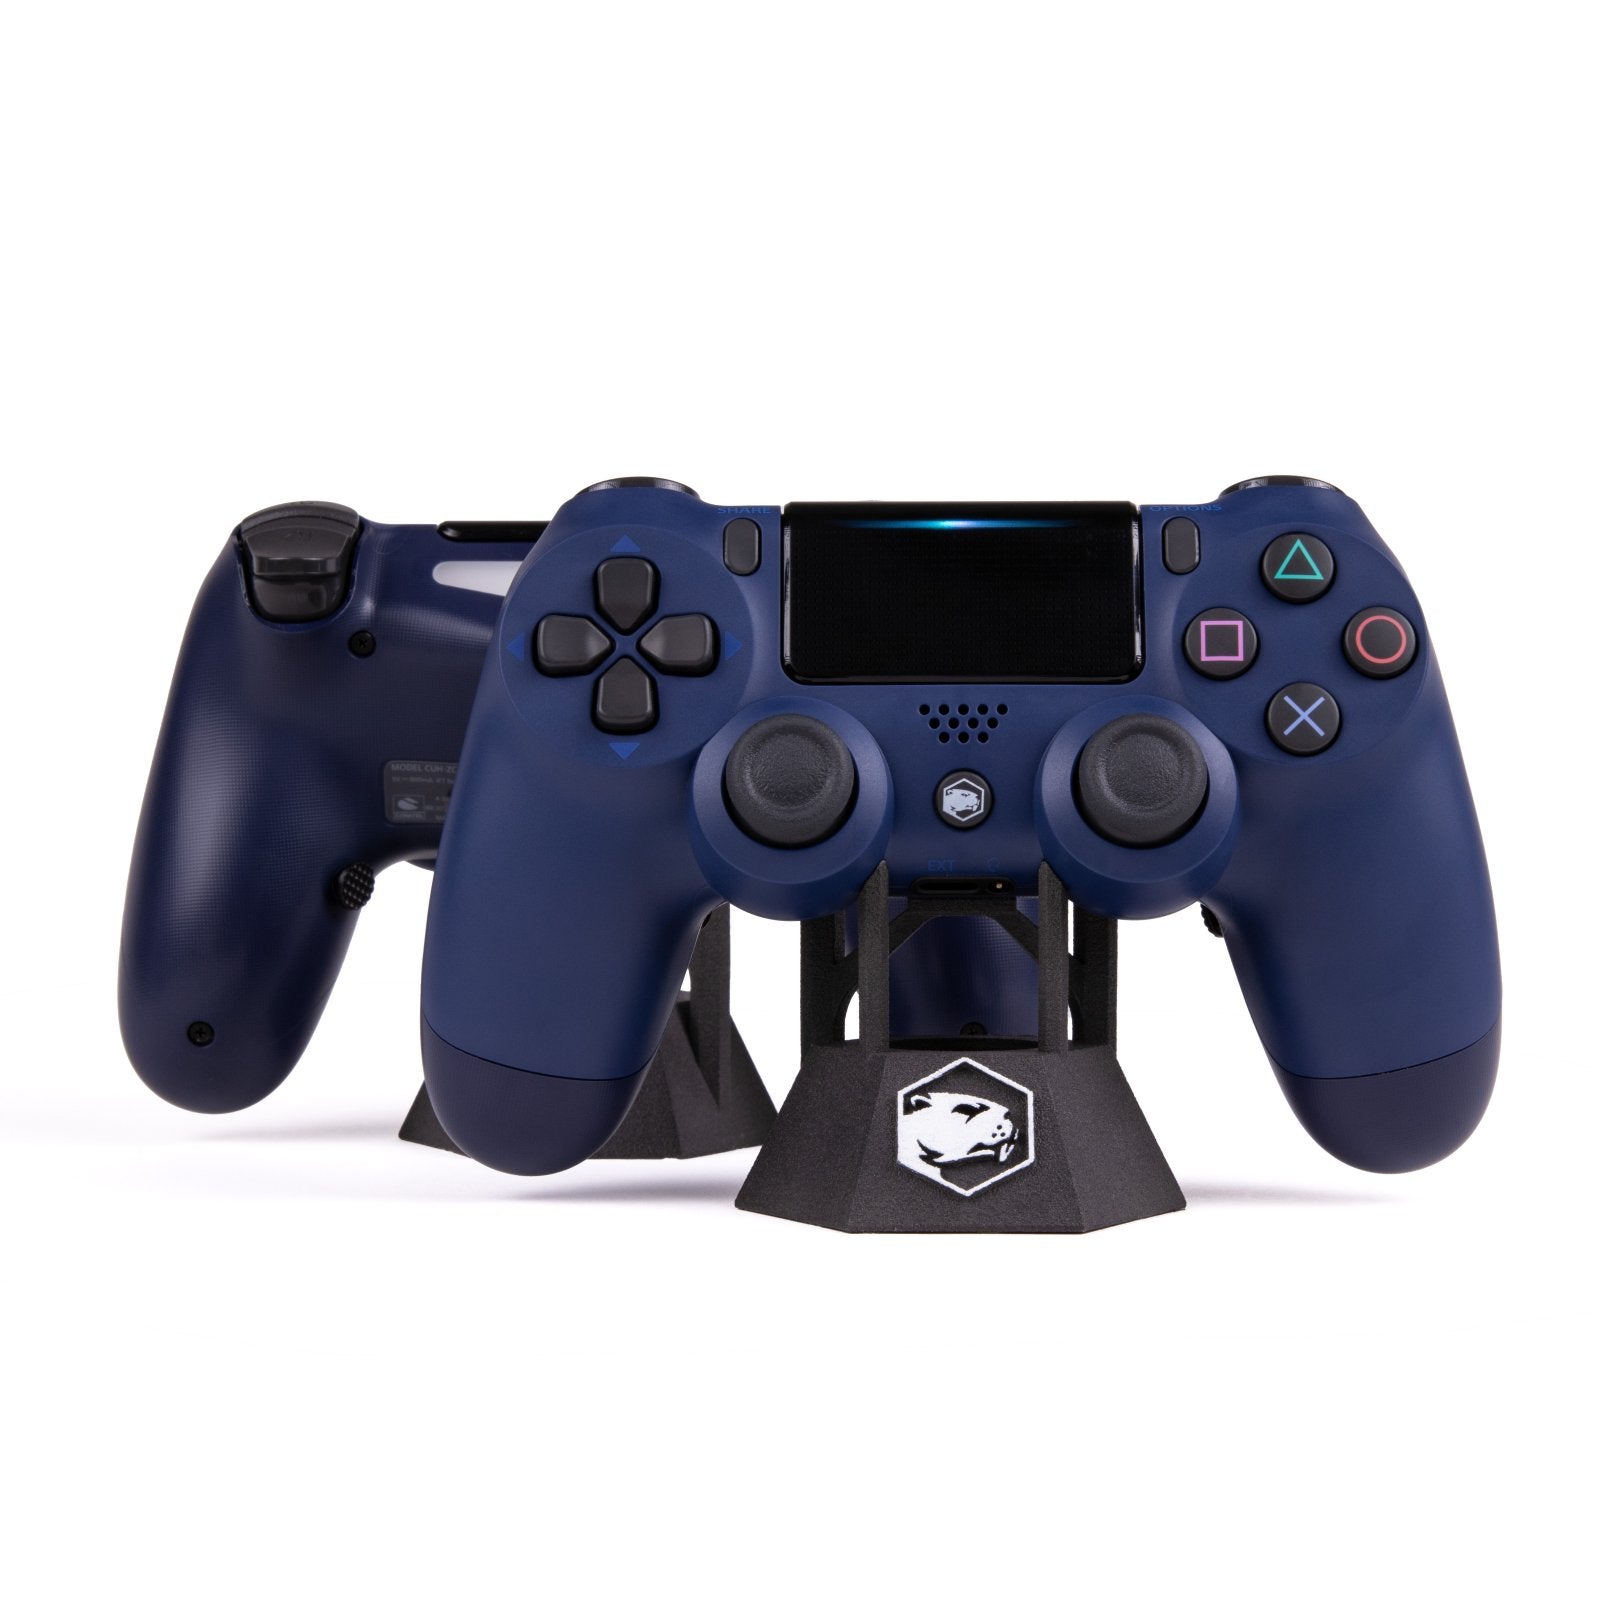 Basic Pick - PS4 Controller